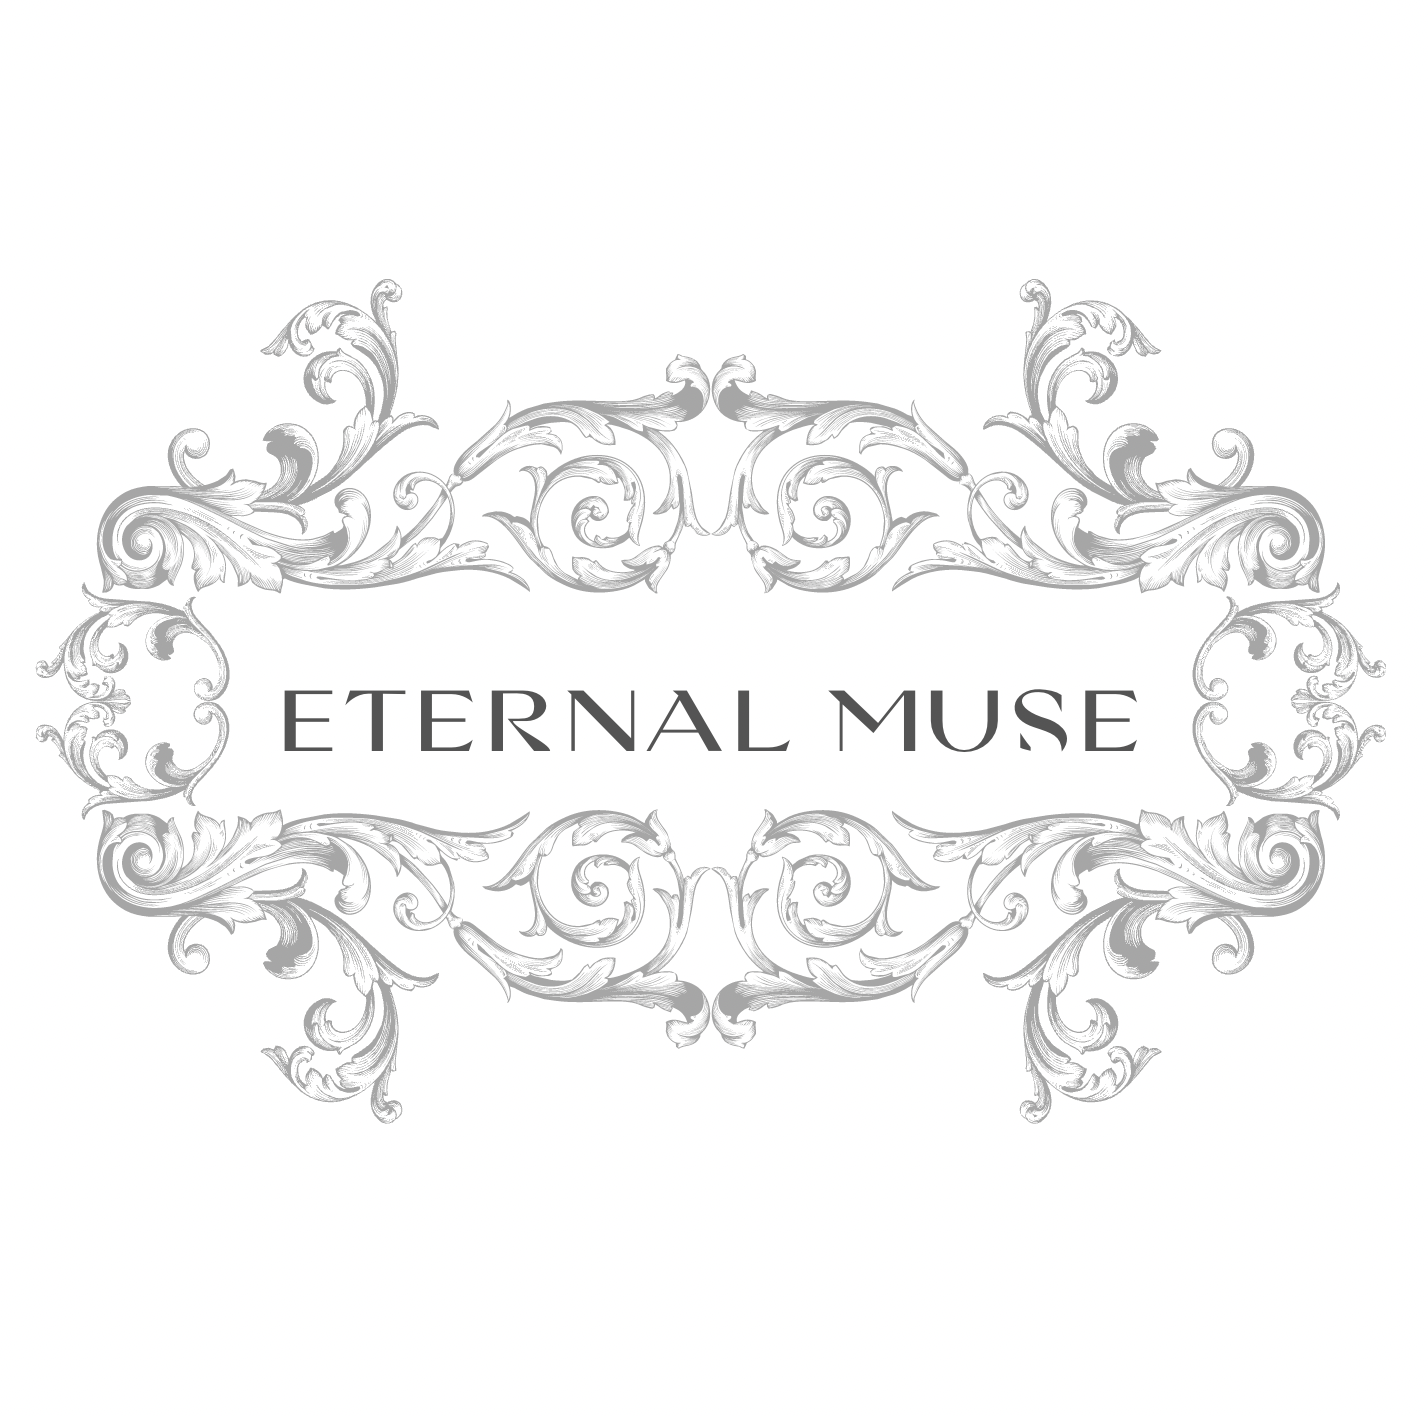 ETERNAL MUSE GIFT CARDS